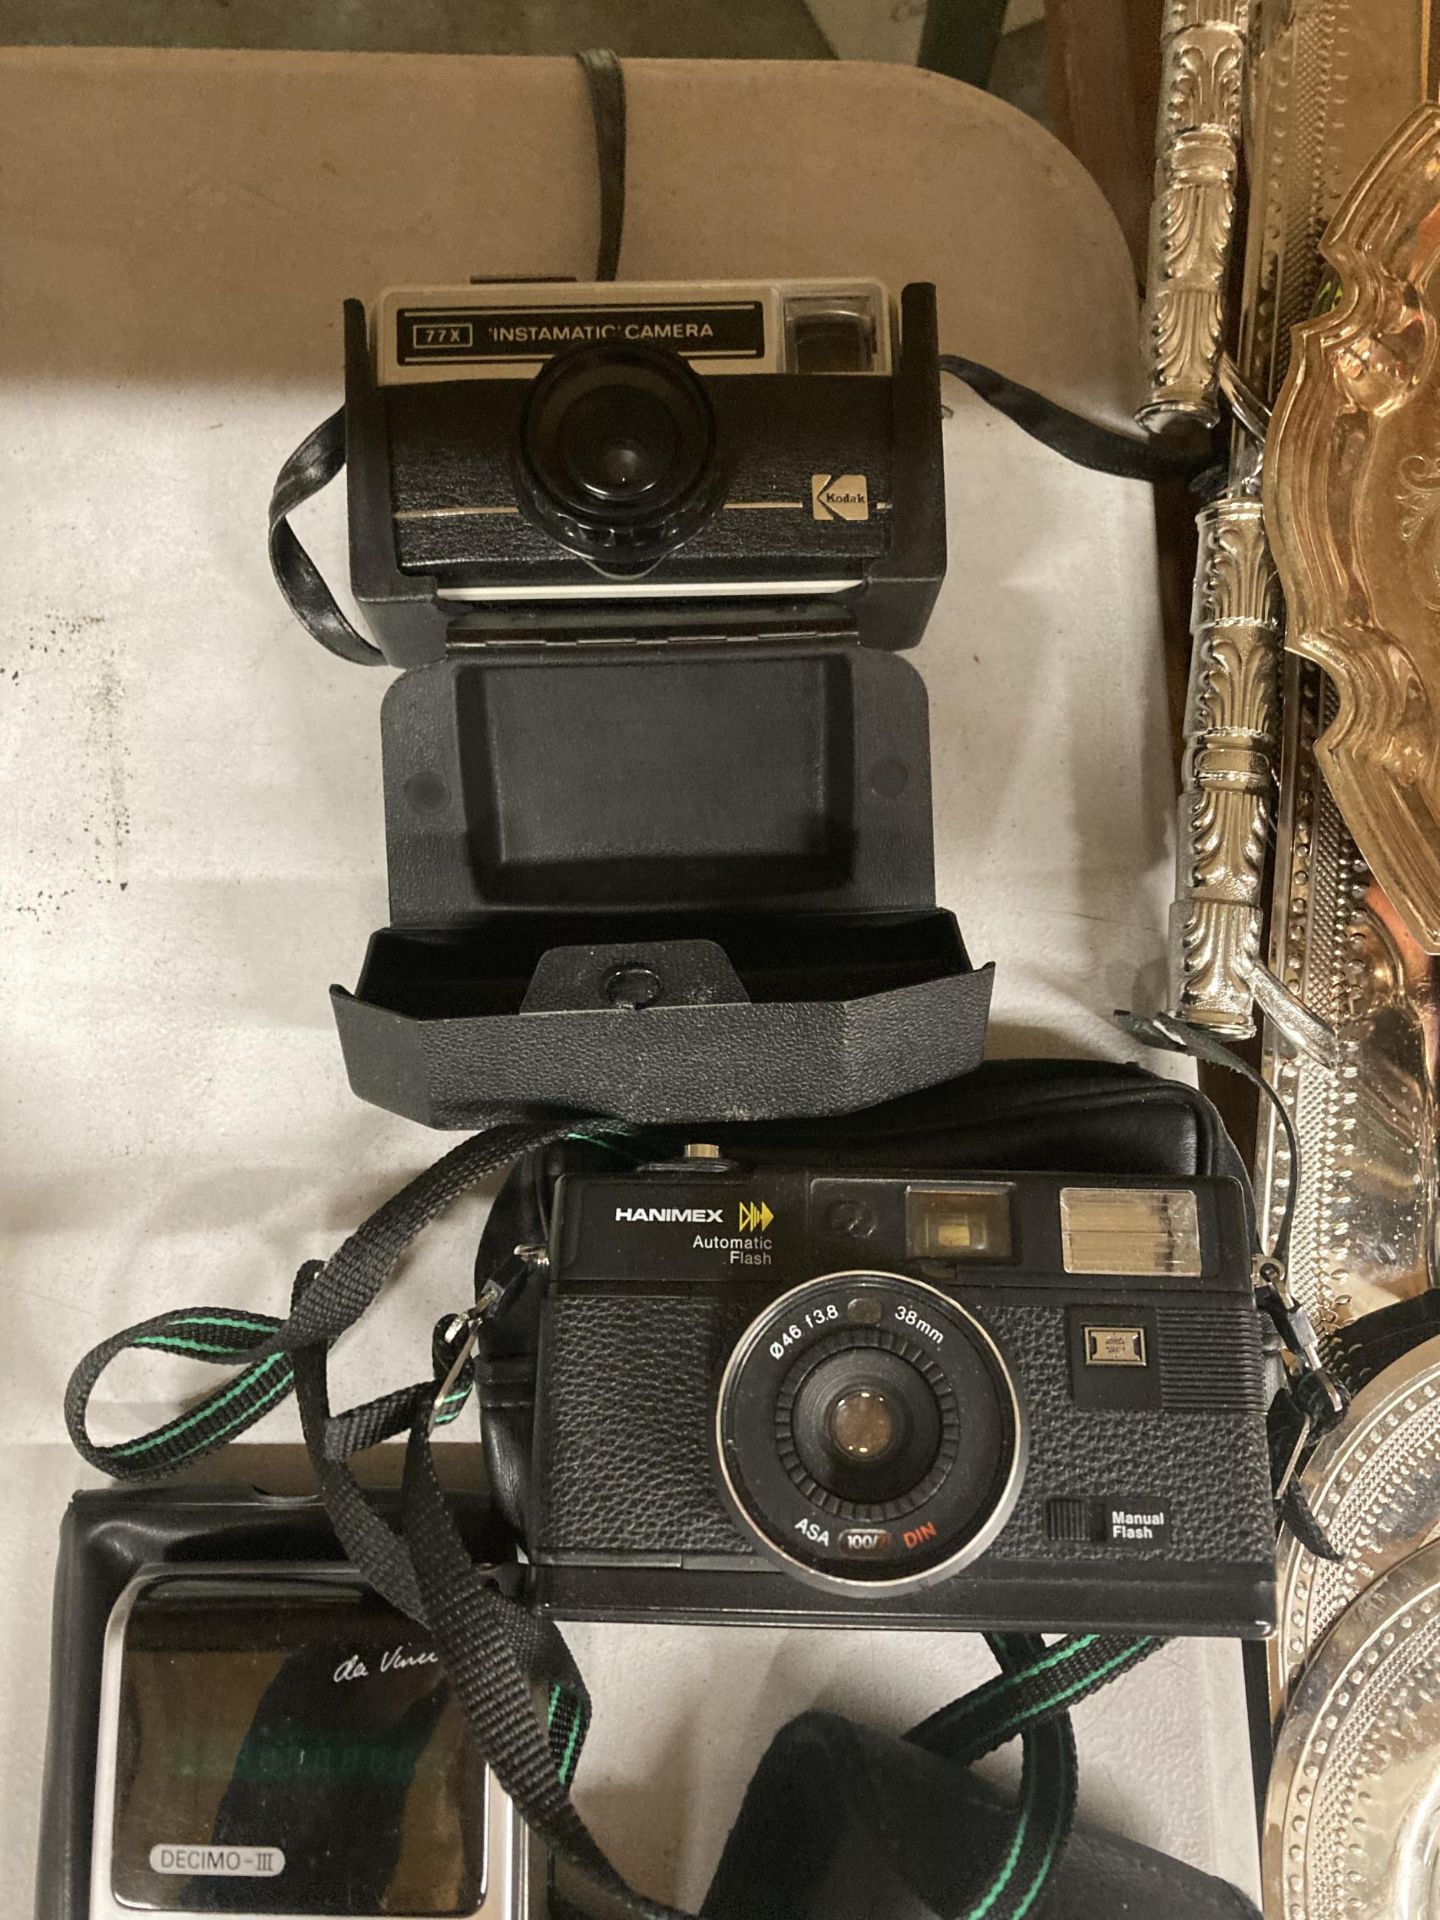 THREE VINTAGE CAMERAS, A PAIR OF BINOCULARS AND A CALCULATOR - Image 3 of 4